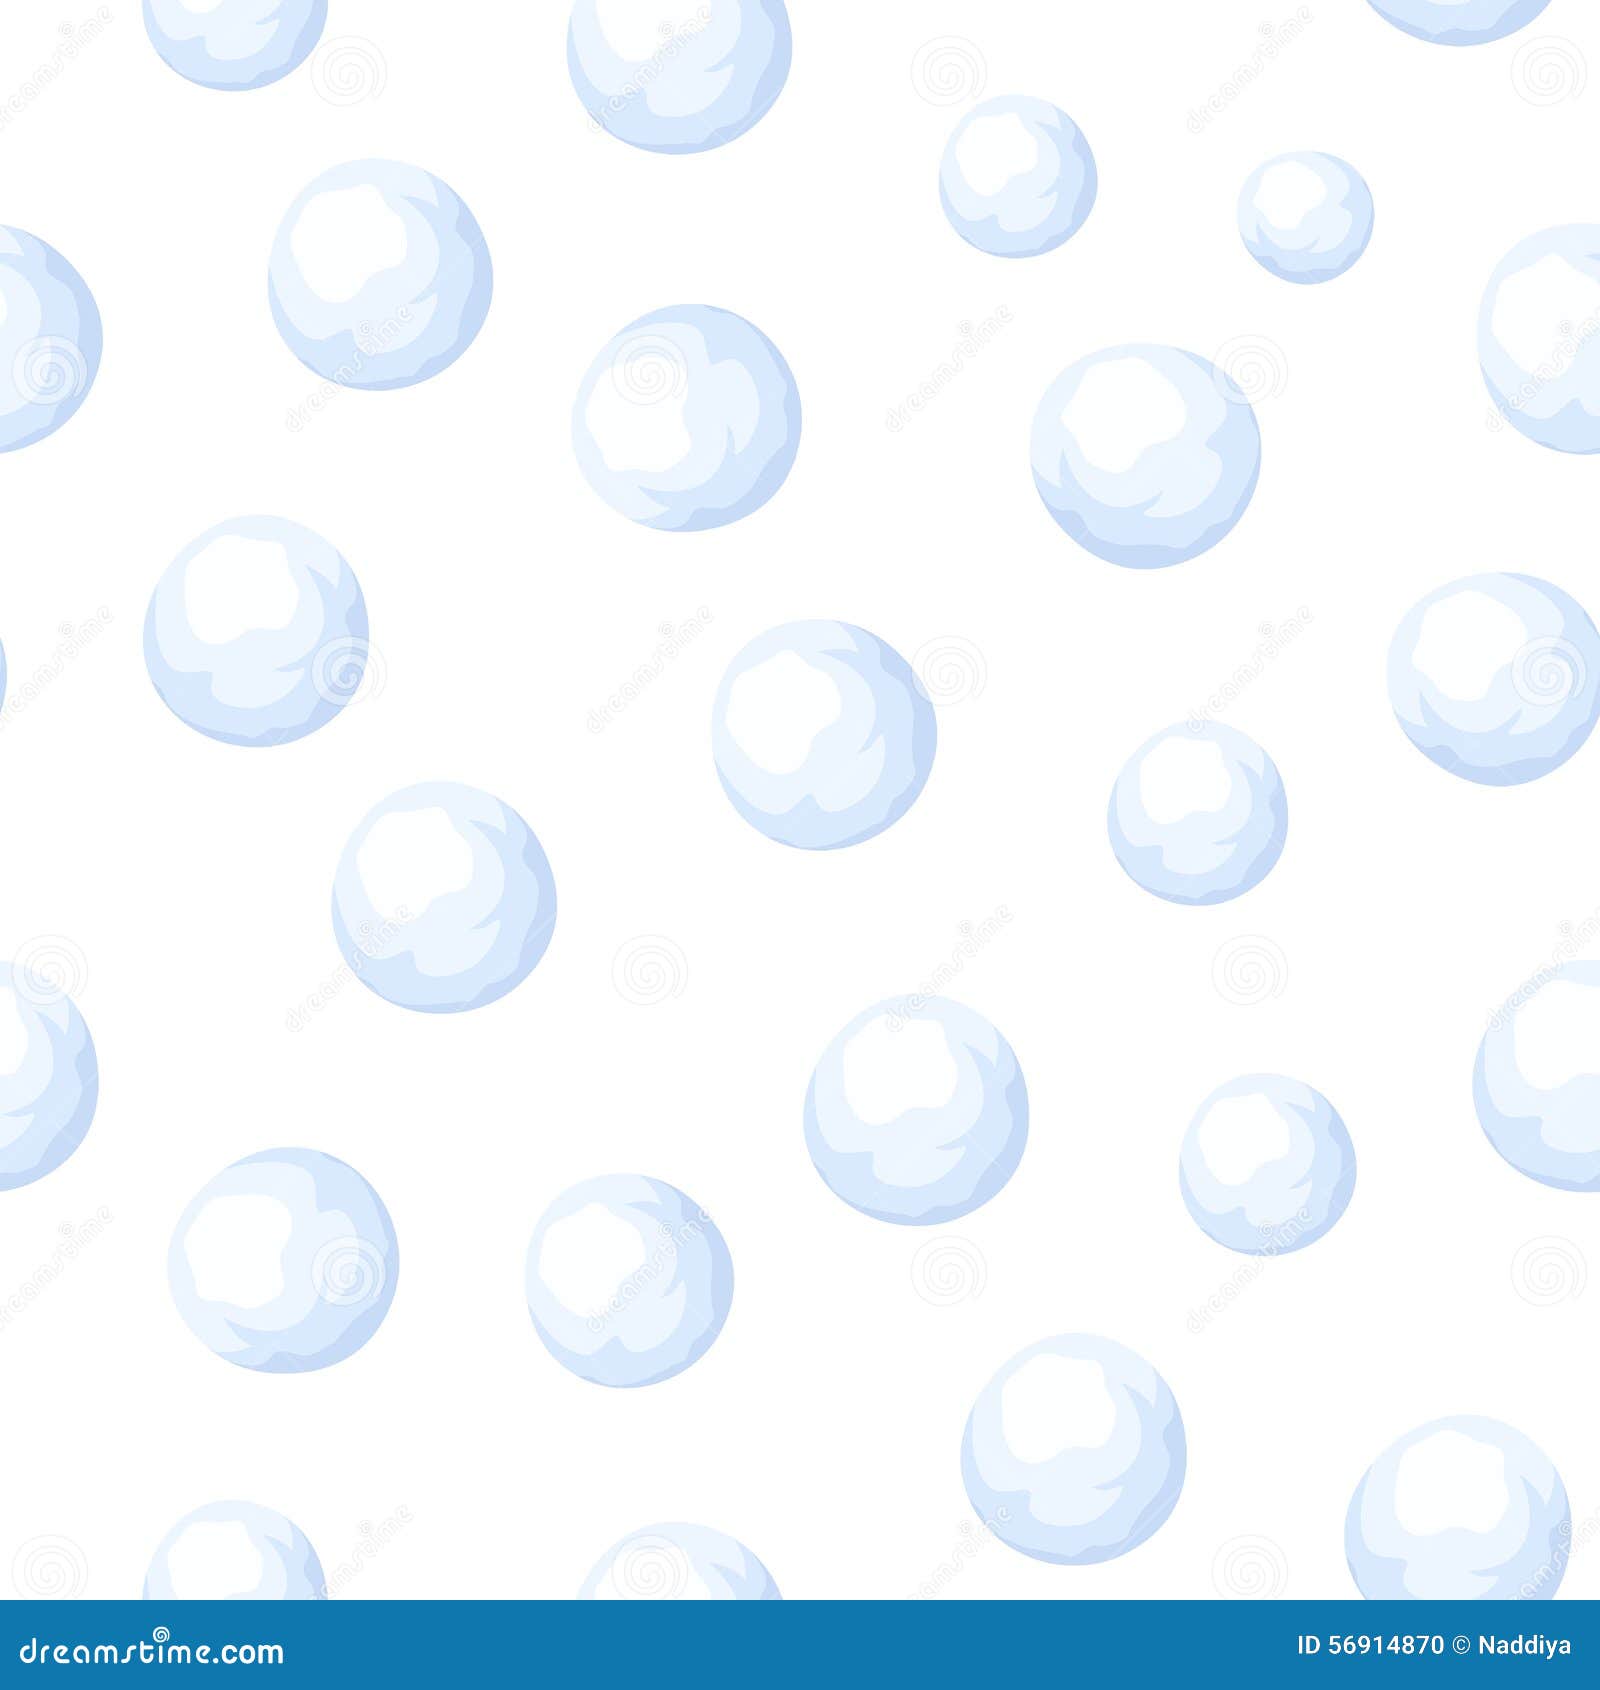 Download Seamless Background With Snowballs. Vector Illustration ...